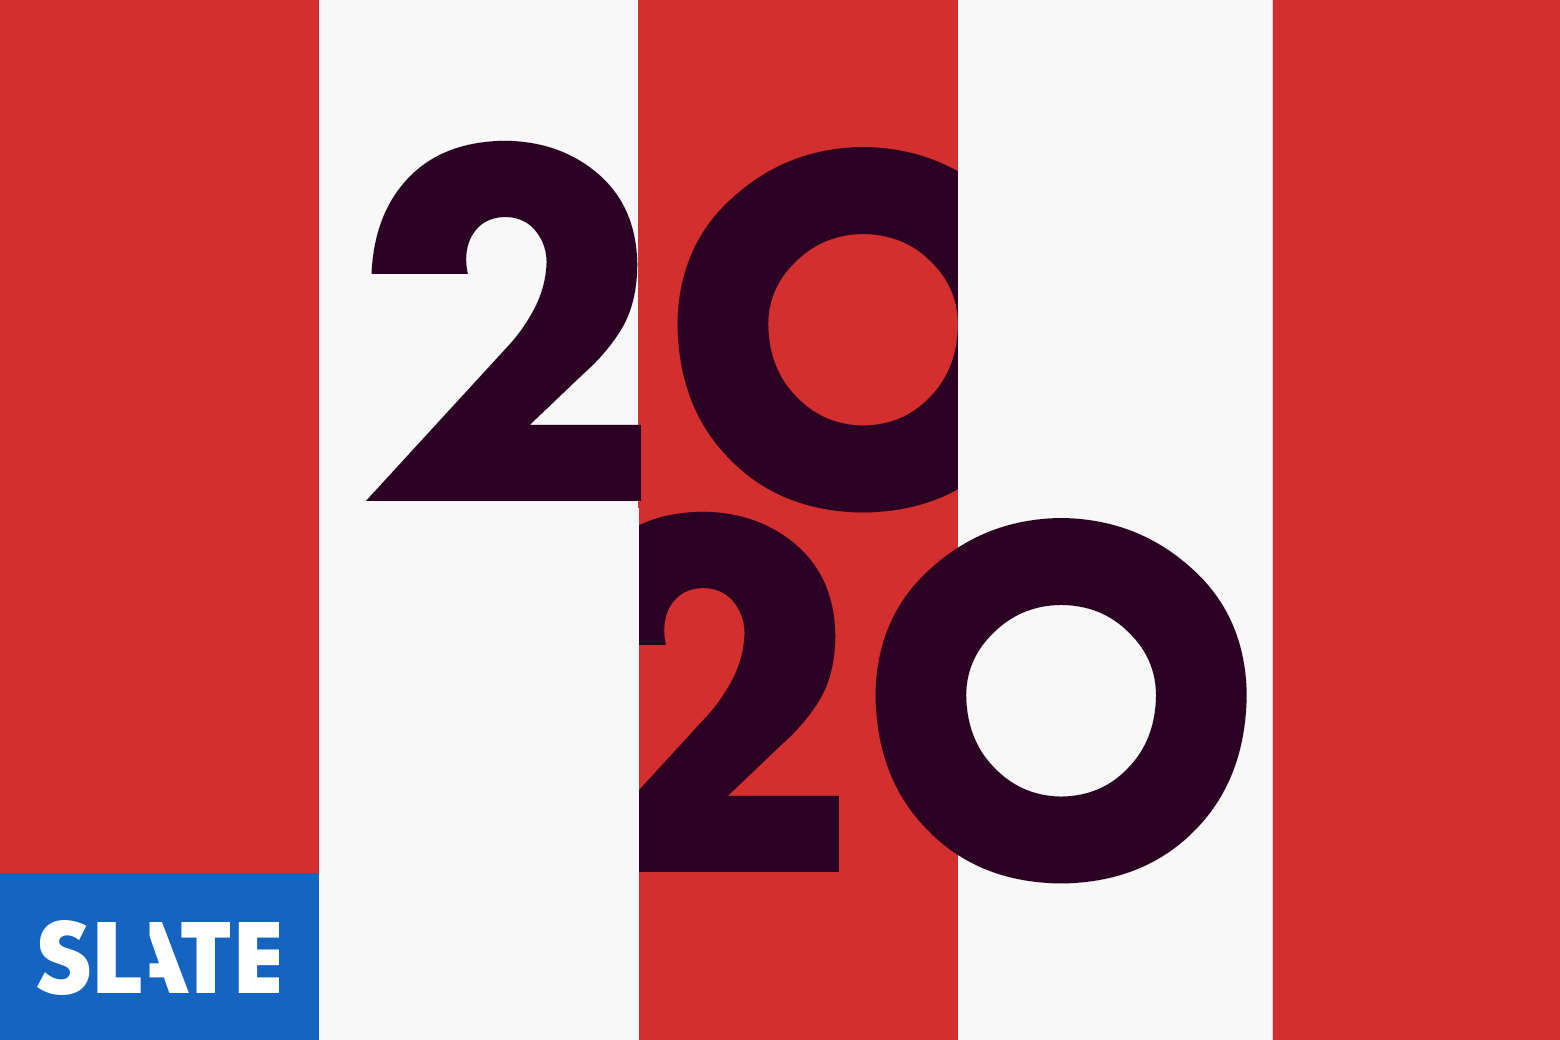 Illustration of the number 2020 inside the stripes of an American flag